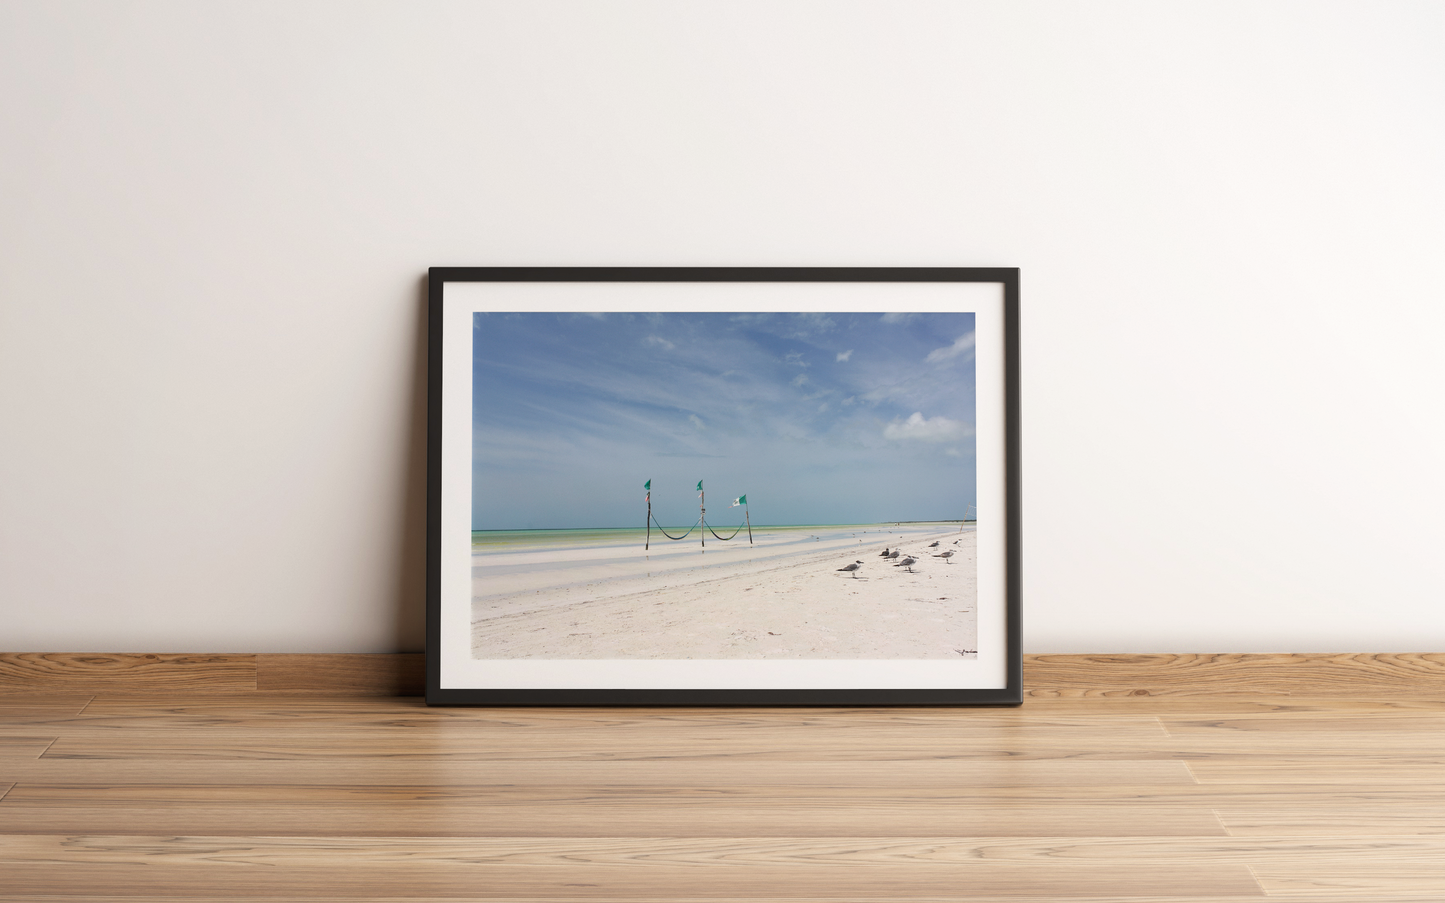 Location  Holbox, Mexico.  Shot  Captured May 2016 on Canon DSLR.  Print  Our fine art Giclée prints are made to order in Australia, come unframed and are professionally printed on Canson Baryta Prestige 340gsm (archival semi-gloss paper).  Print sizes A4 to A2 are inclusive of a 30mm (3cm) white border and print size A1 is inclusive of a 50mm (5cm) white border. This gives our prints more balanced and contemporary look. 